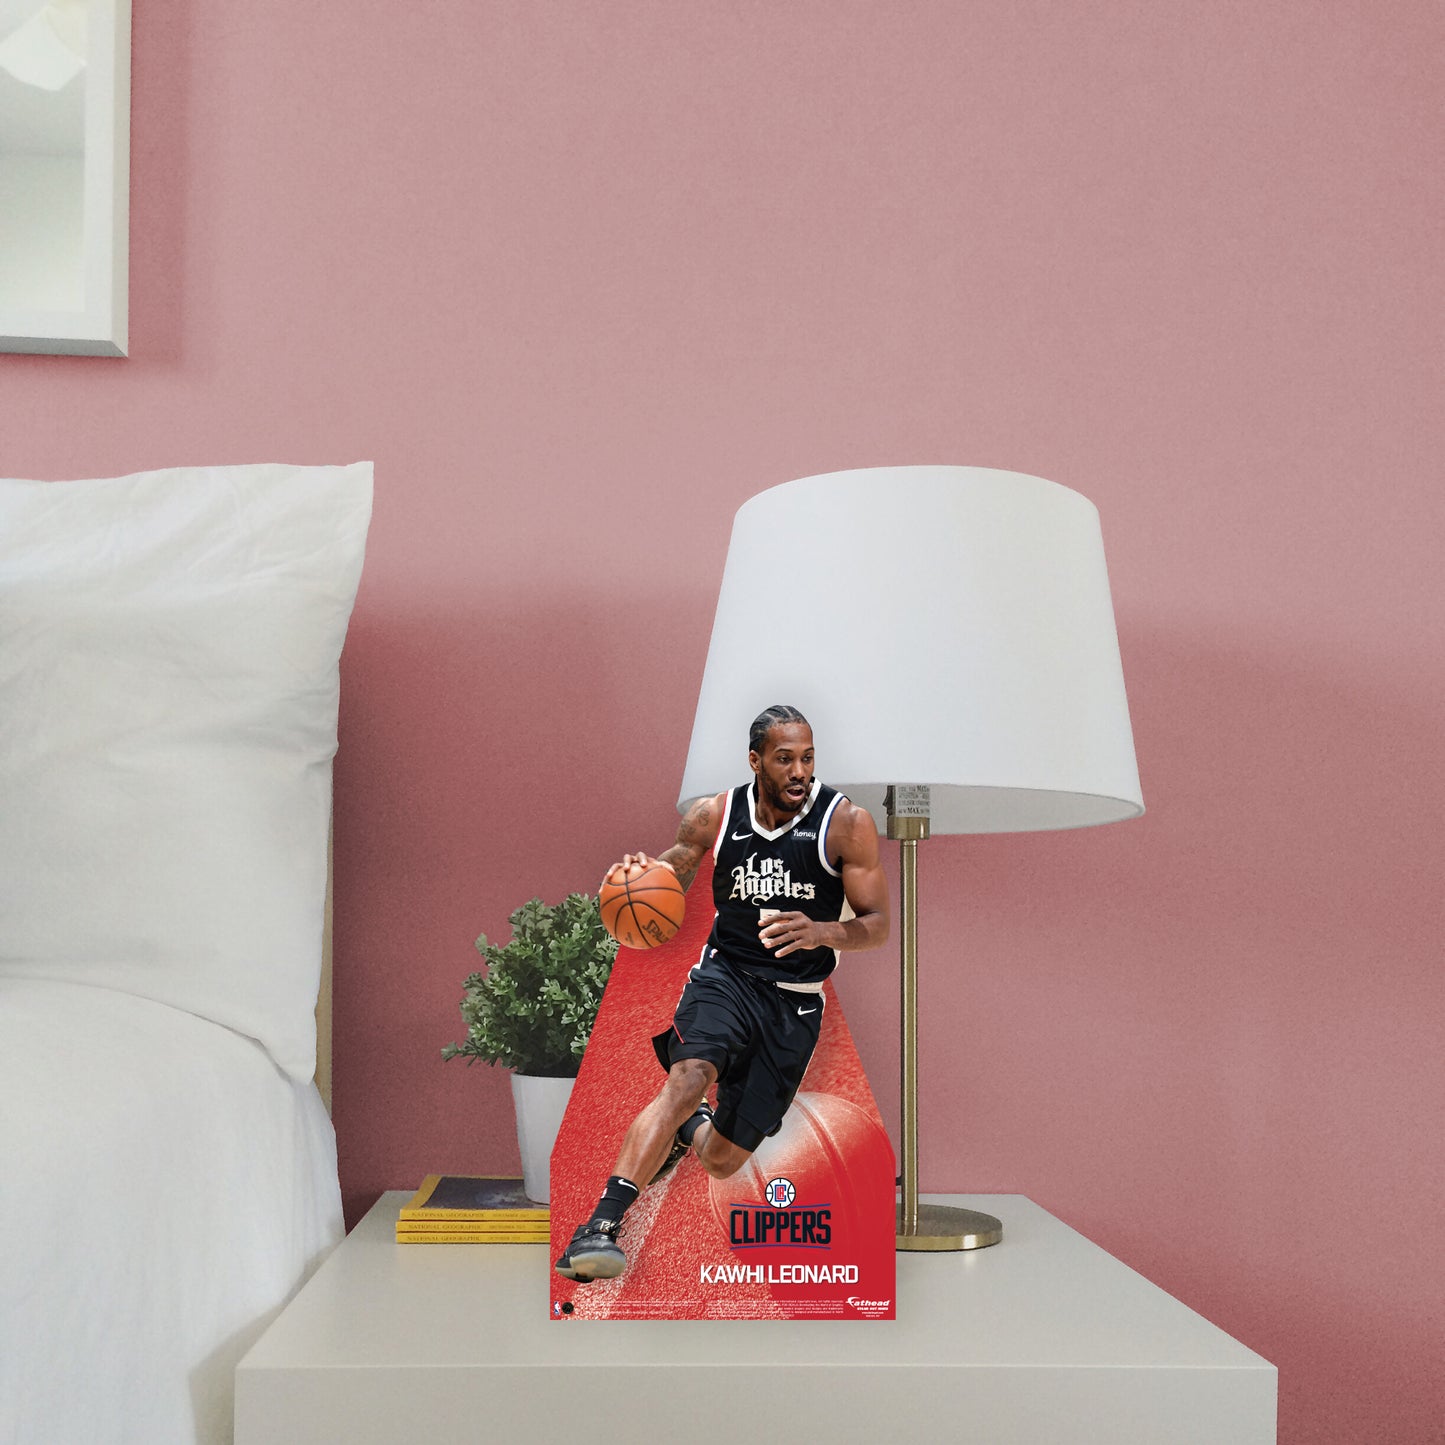 Los Angeles Clippers: Kawhi Leonard 2021  Mini   Cardstock Cutout  - Officially Licensed NBA    Stand Out